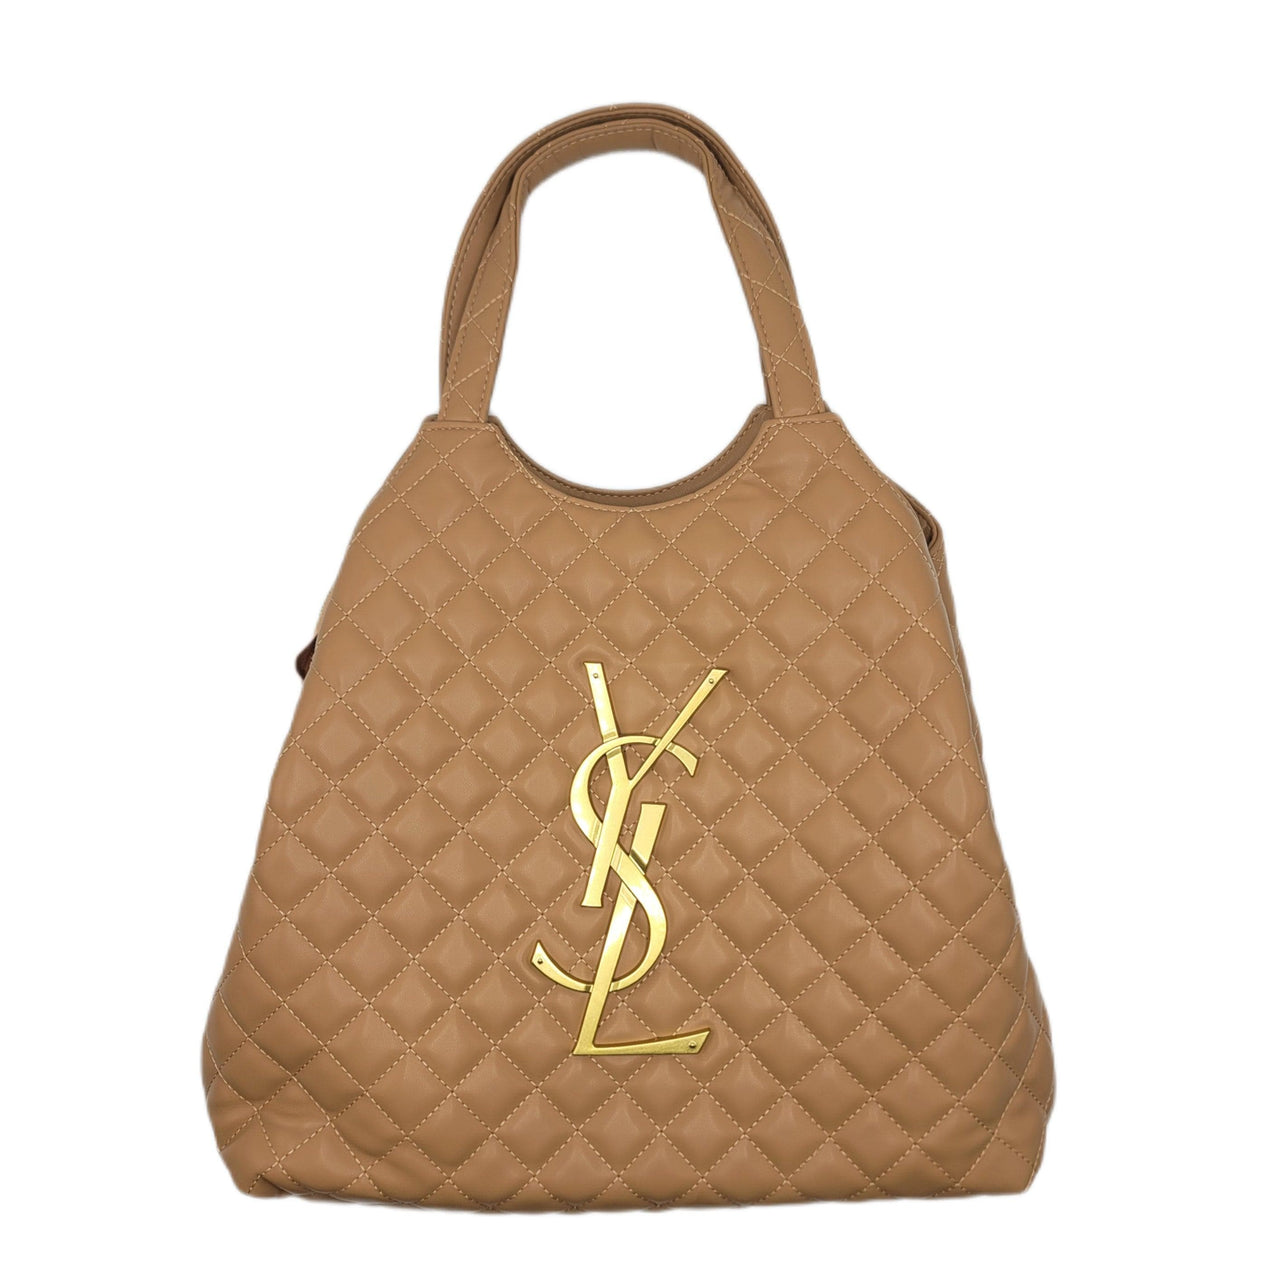 The Bag Couture Handbags, Wallets & Cases YSL iCare Quilted Tote Bag Black/White/Beige